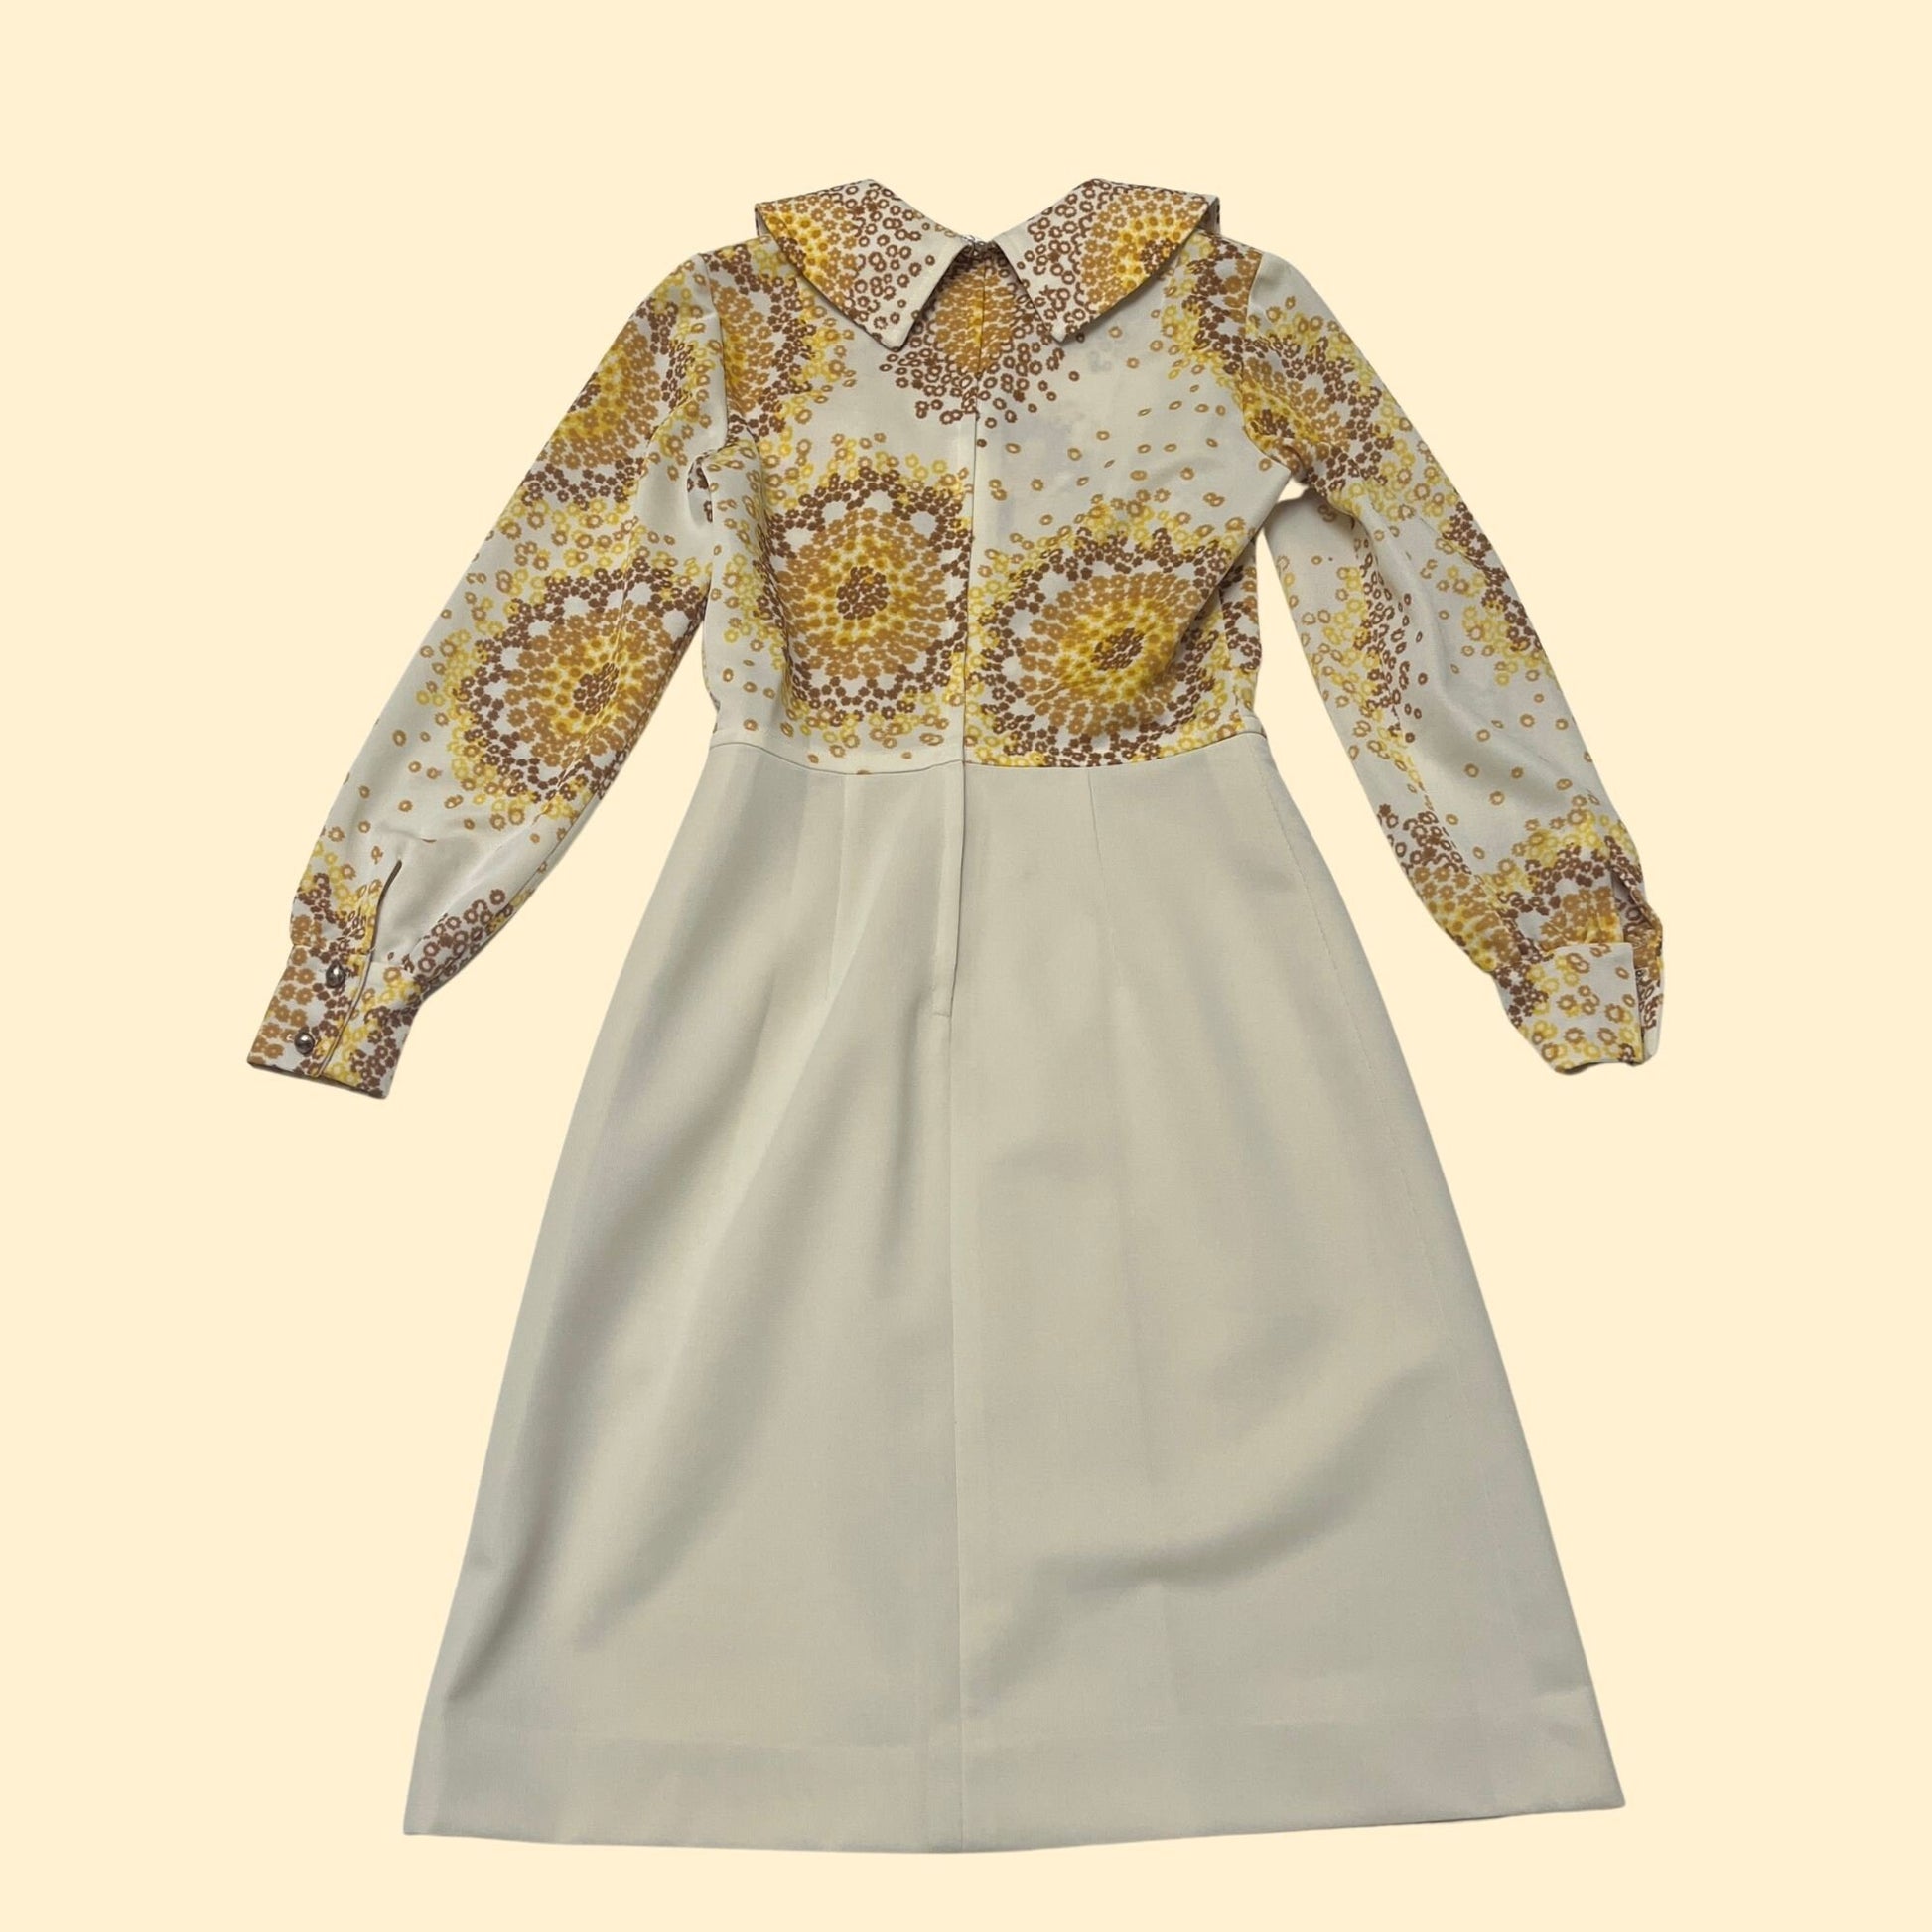 70s floral fit & flare dress, vintage mustard yellow and beige psychedelic 1970s sleeved midi dress